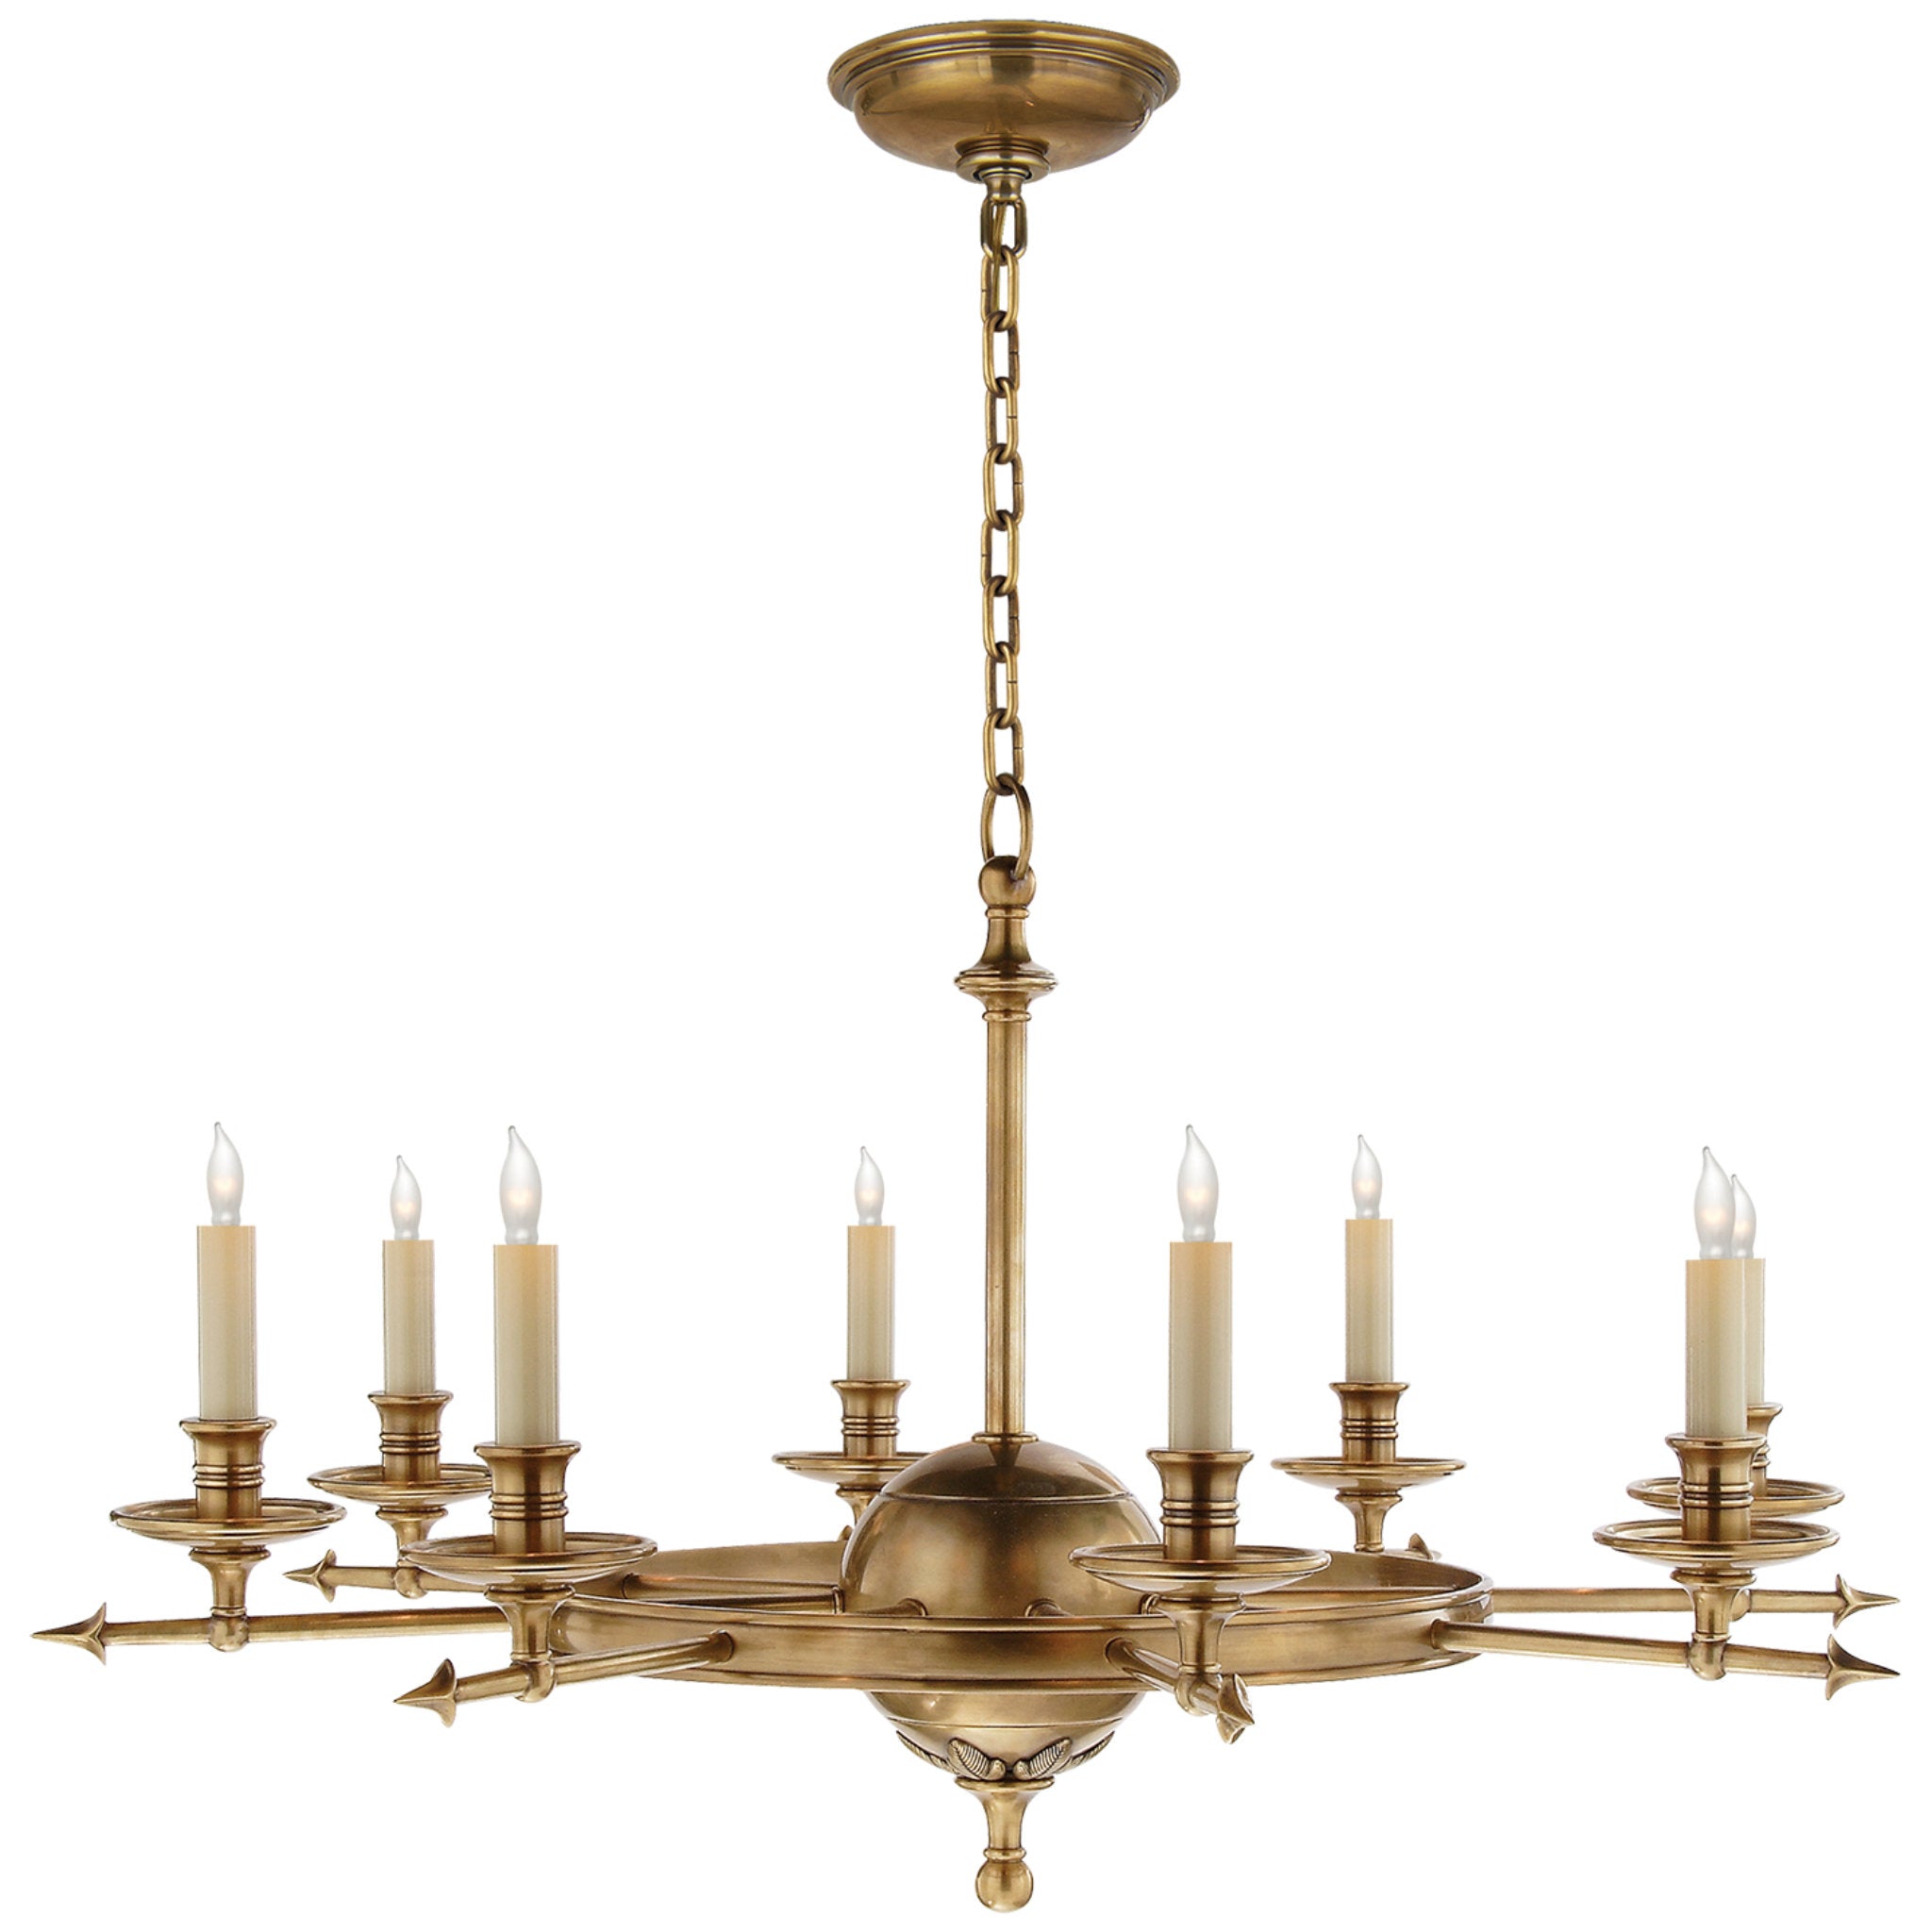 Chapman & Myers Leaf and Arrow Large Chandelier in Antique-Burnished Brass